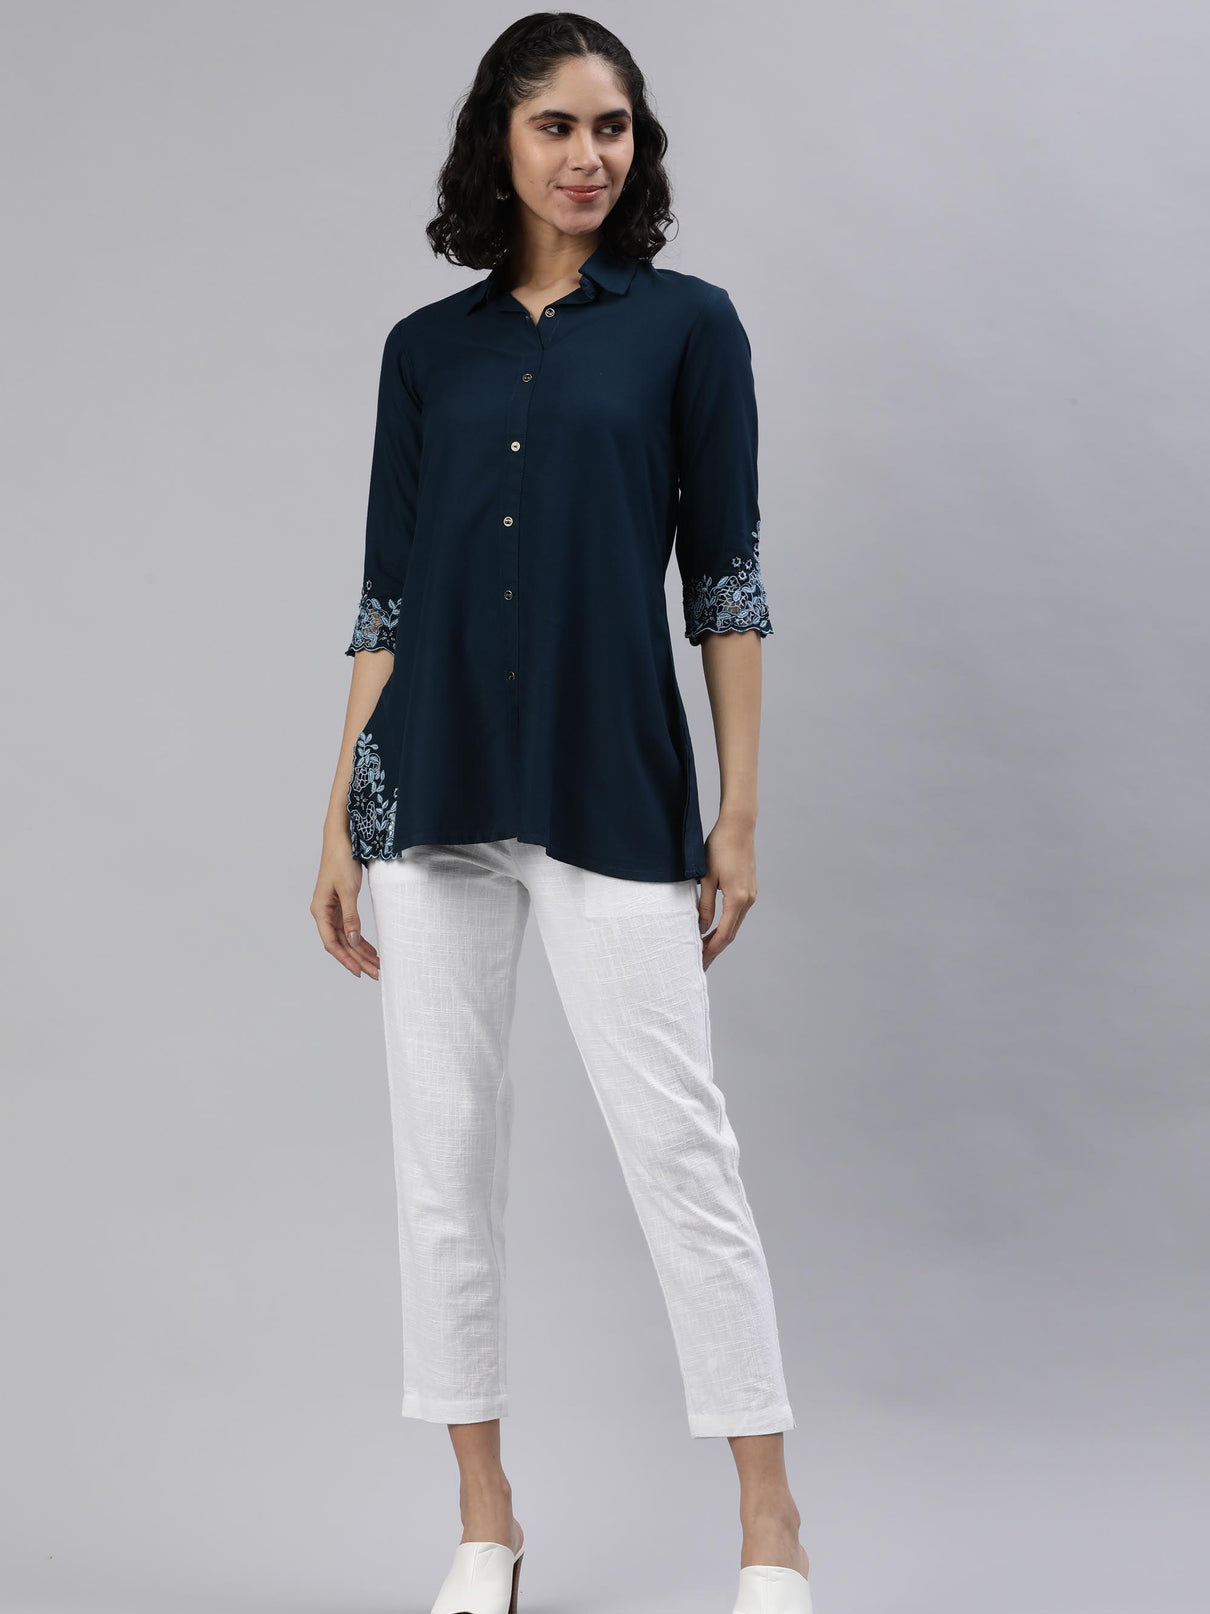 Solid Colored Top With Cutwork Embroidery in Front and Sleeves - Etiquette Apparel